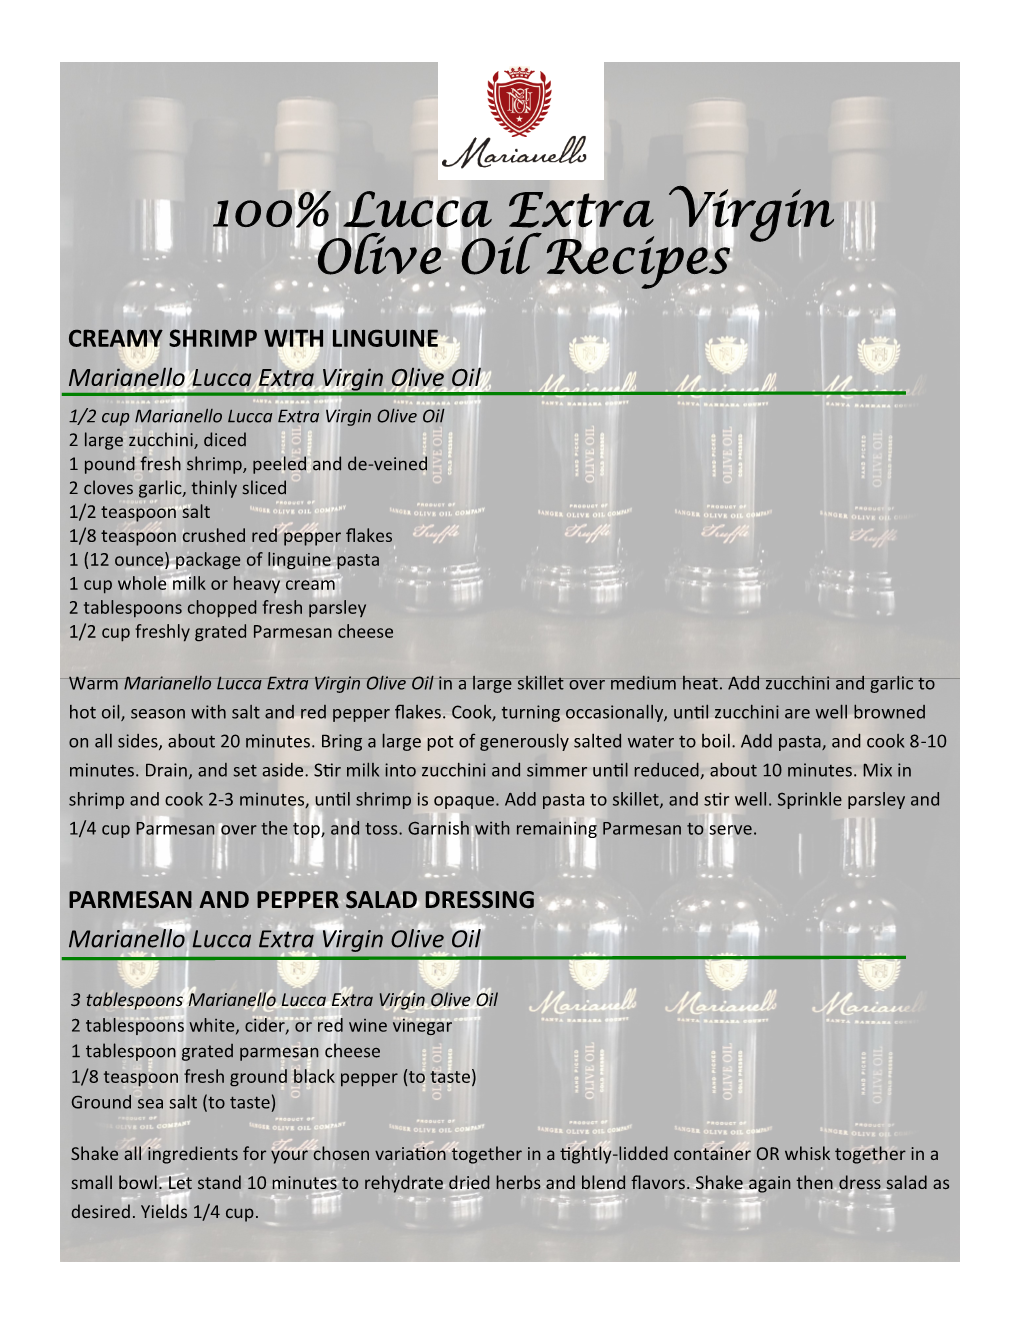 100% Lucca Extra Virgin Olive Oil Recipes